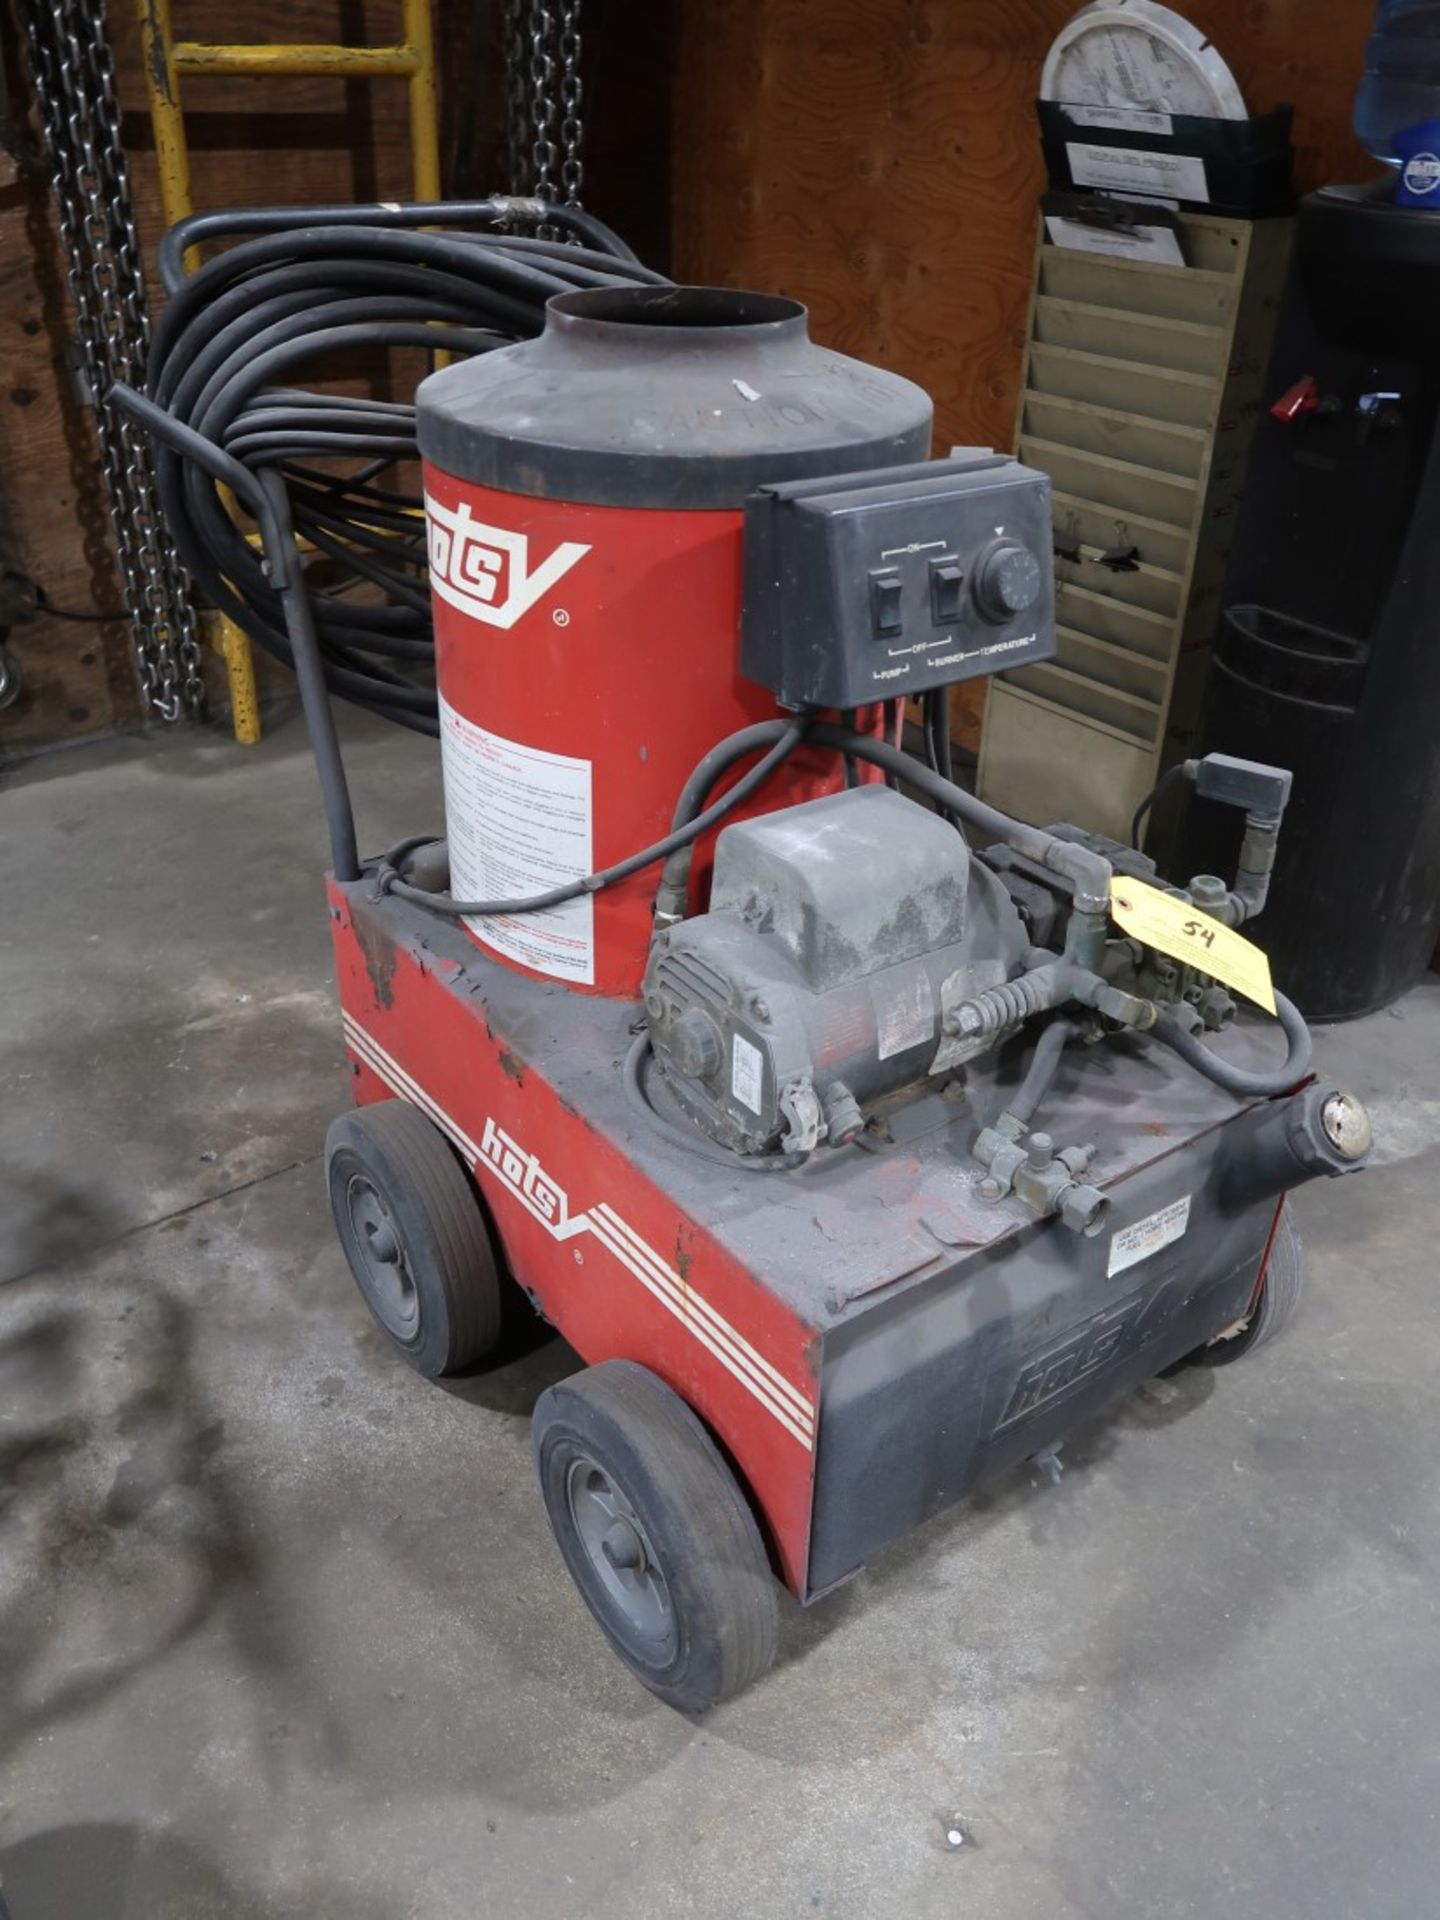 Hotsy Model 550C Hot Water Electric Pressure Washer S/N C43395, 1000 PSI